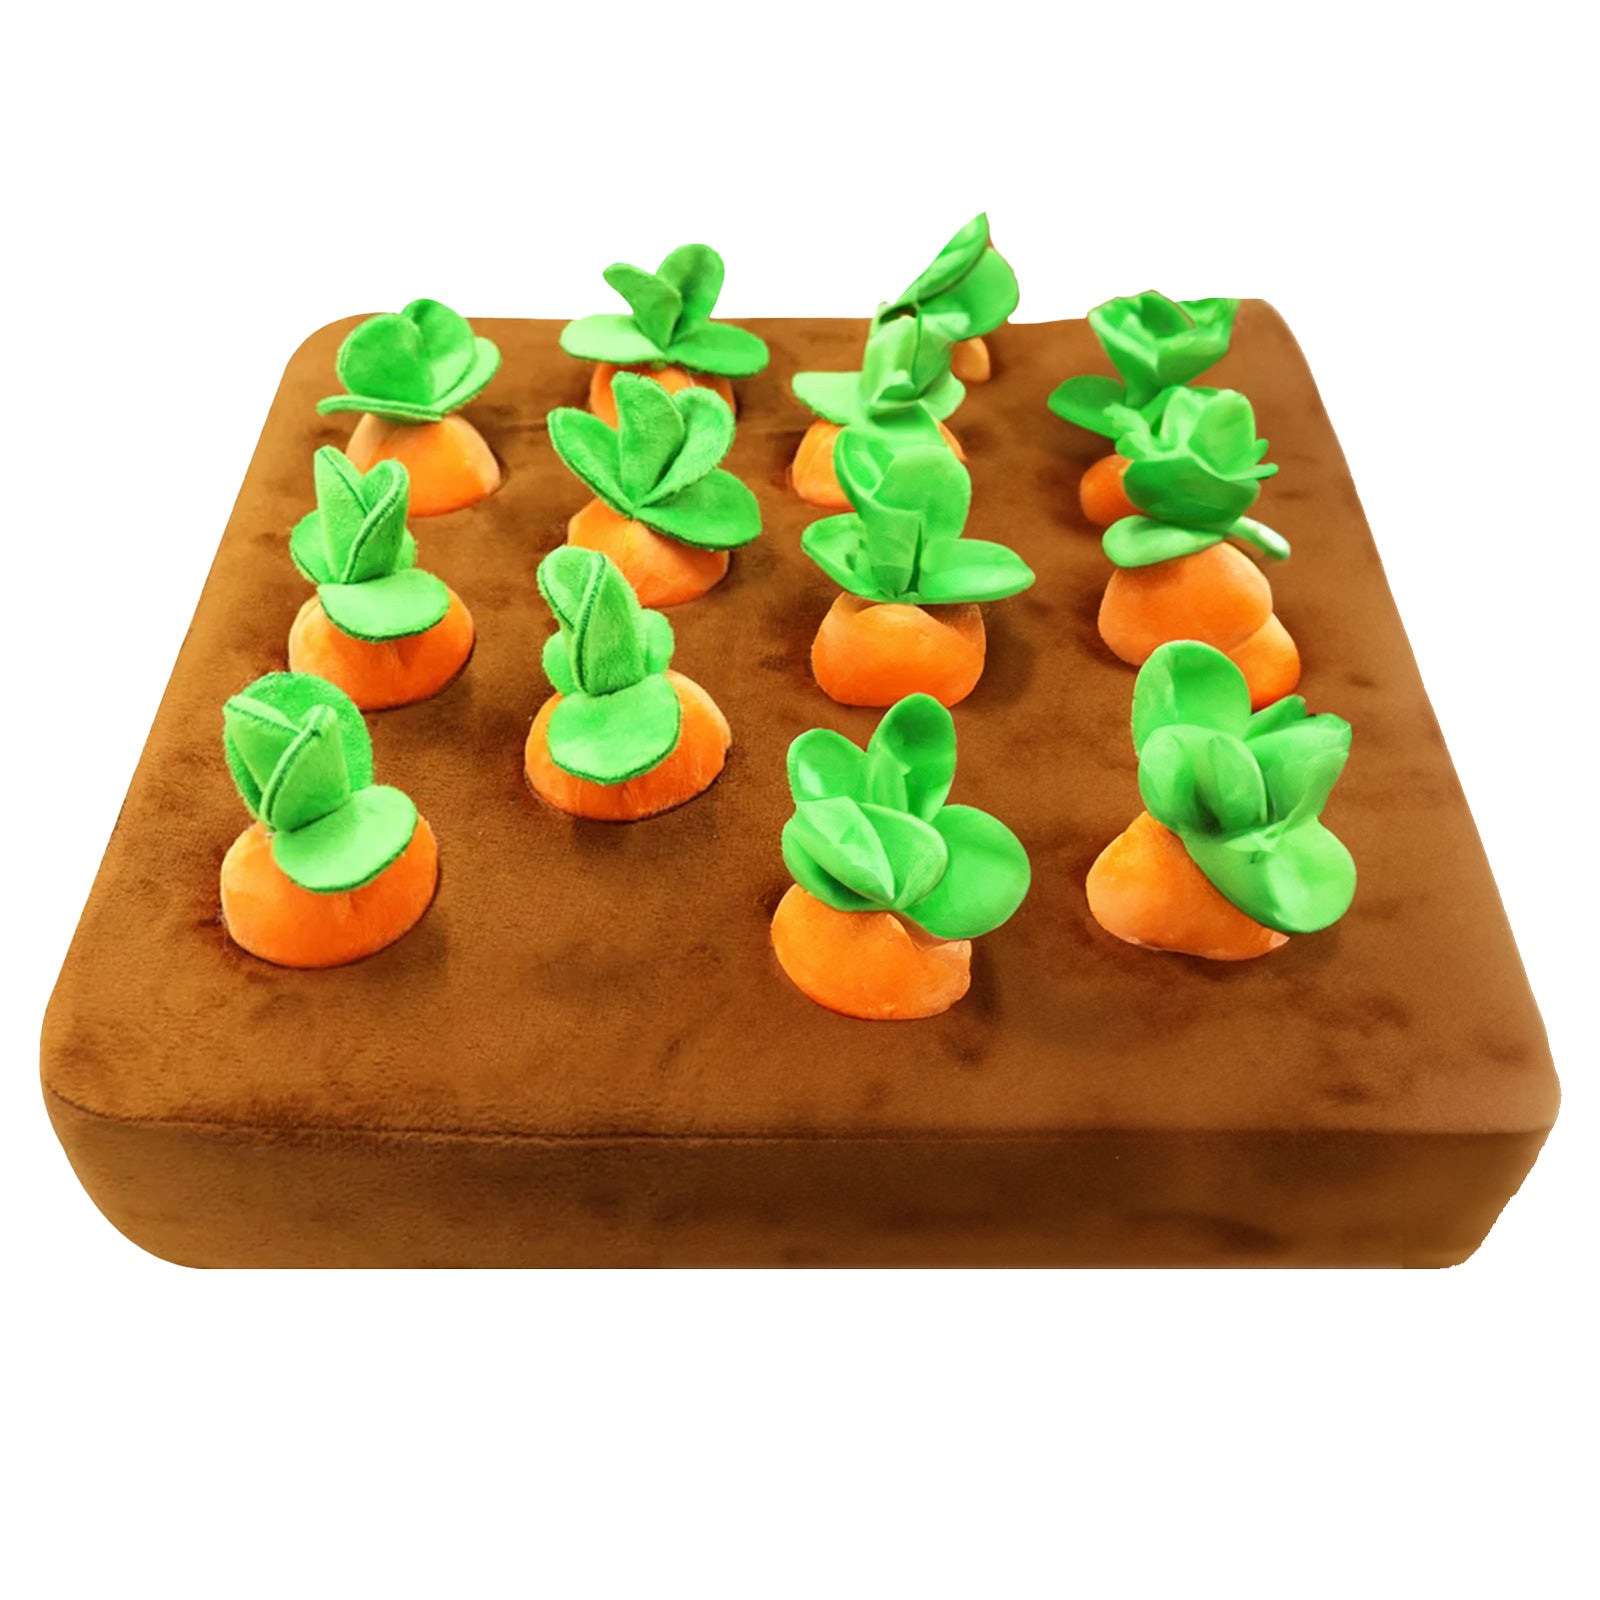 The Fun Carrot Farm - The Ultimate Game for Your Dog